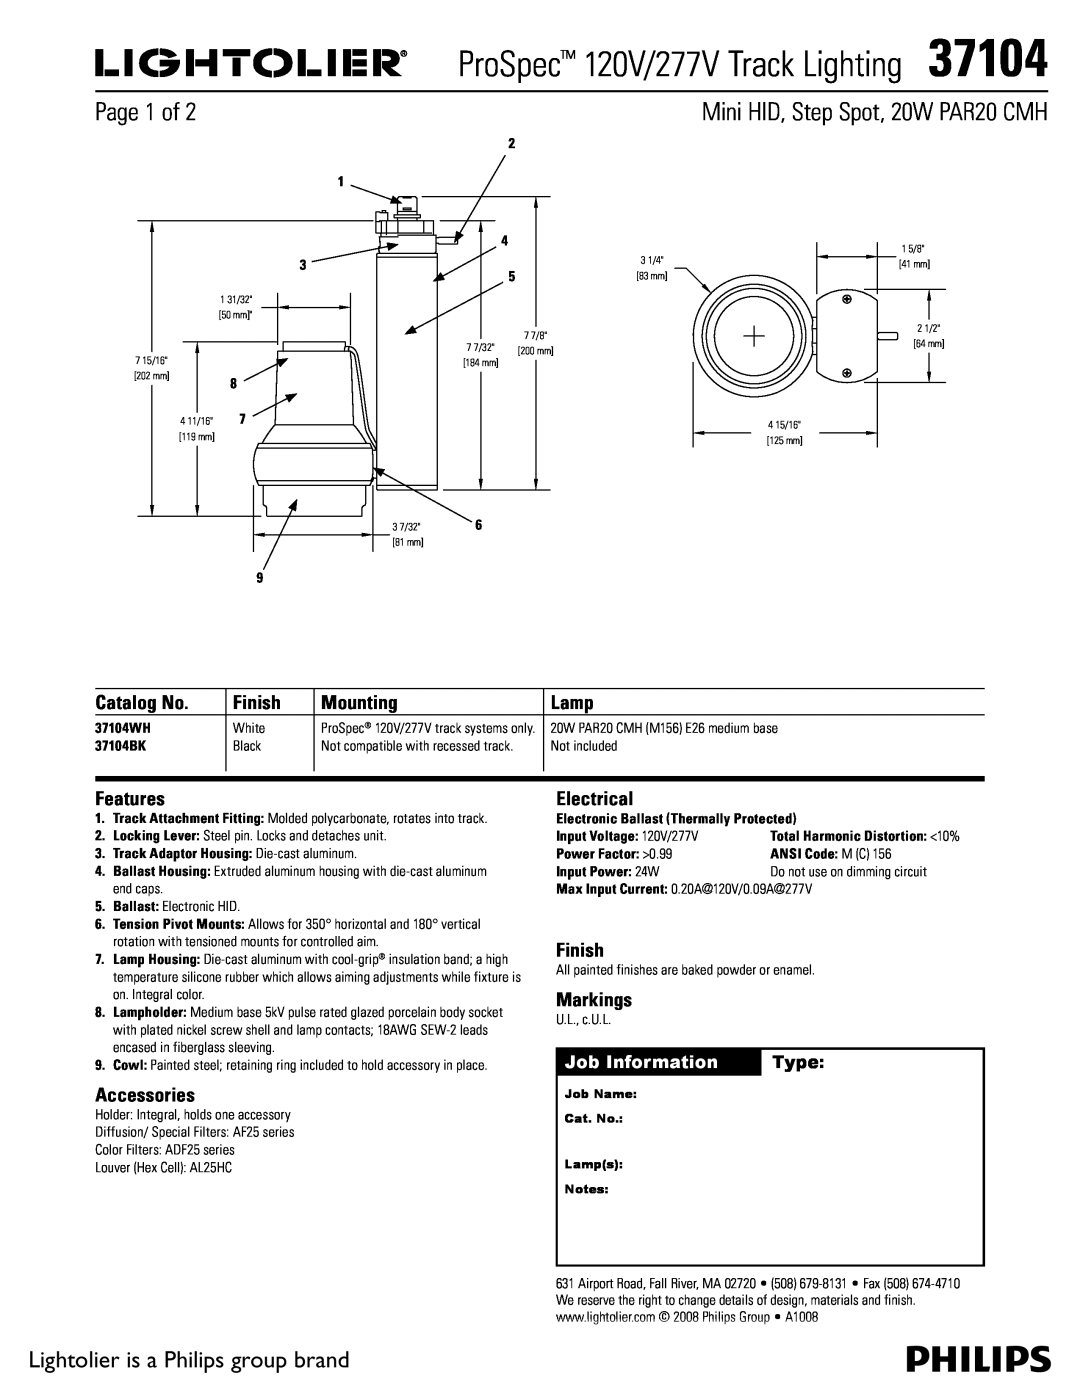 Lightolier 37104 manual Page 1 of, Lightolier is a Philips group brand, Catalog No, Finish, Mounting, Lamp, Features, Type 